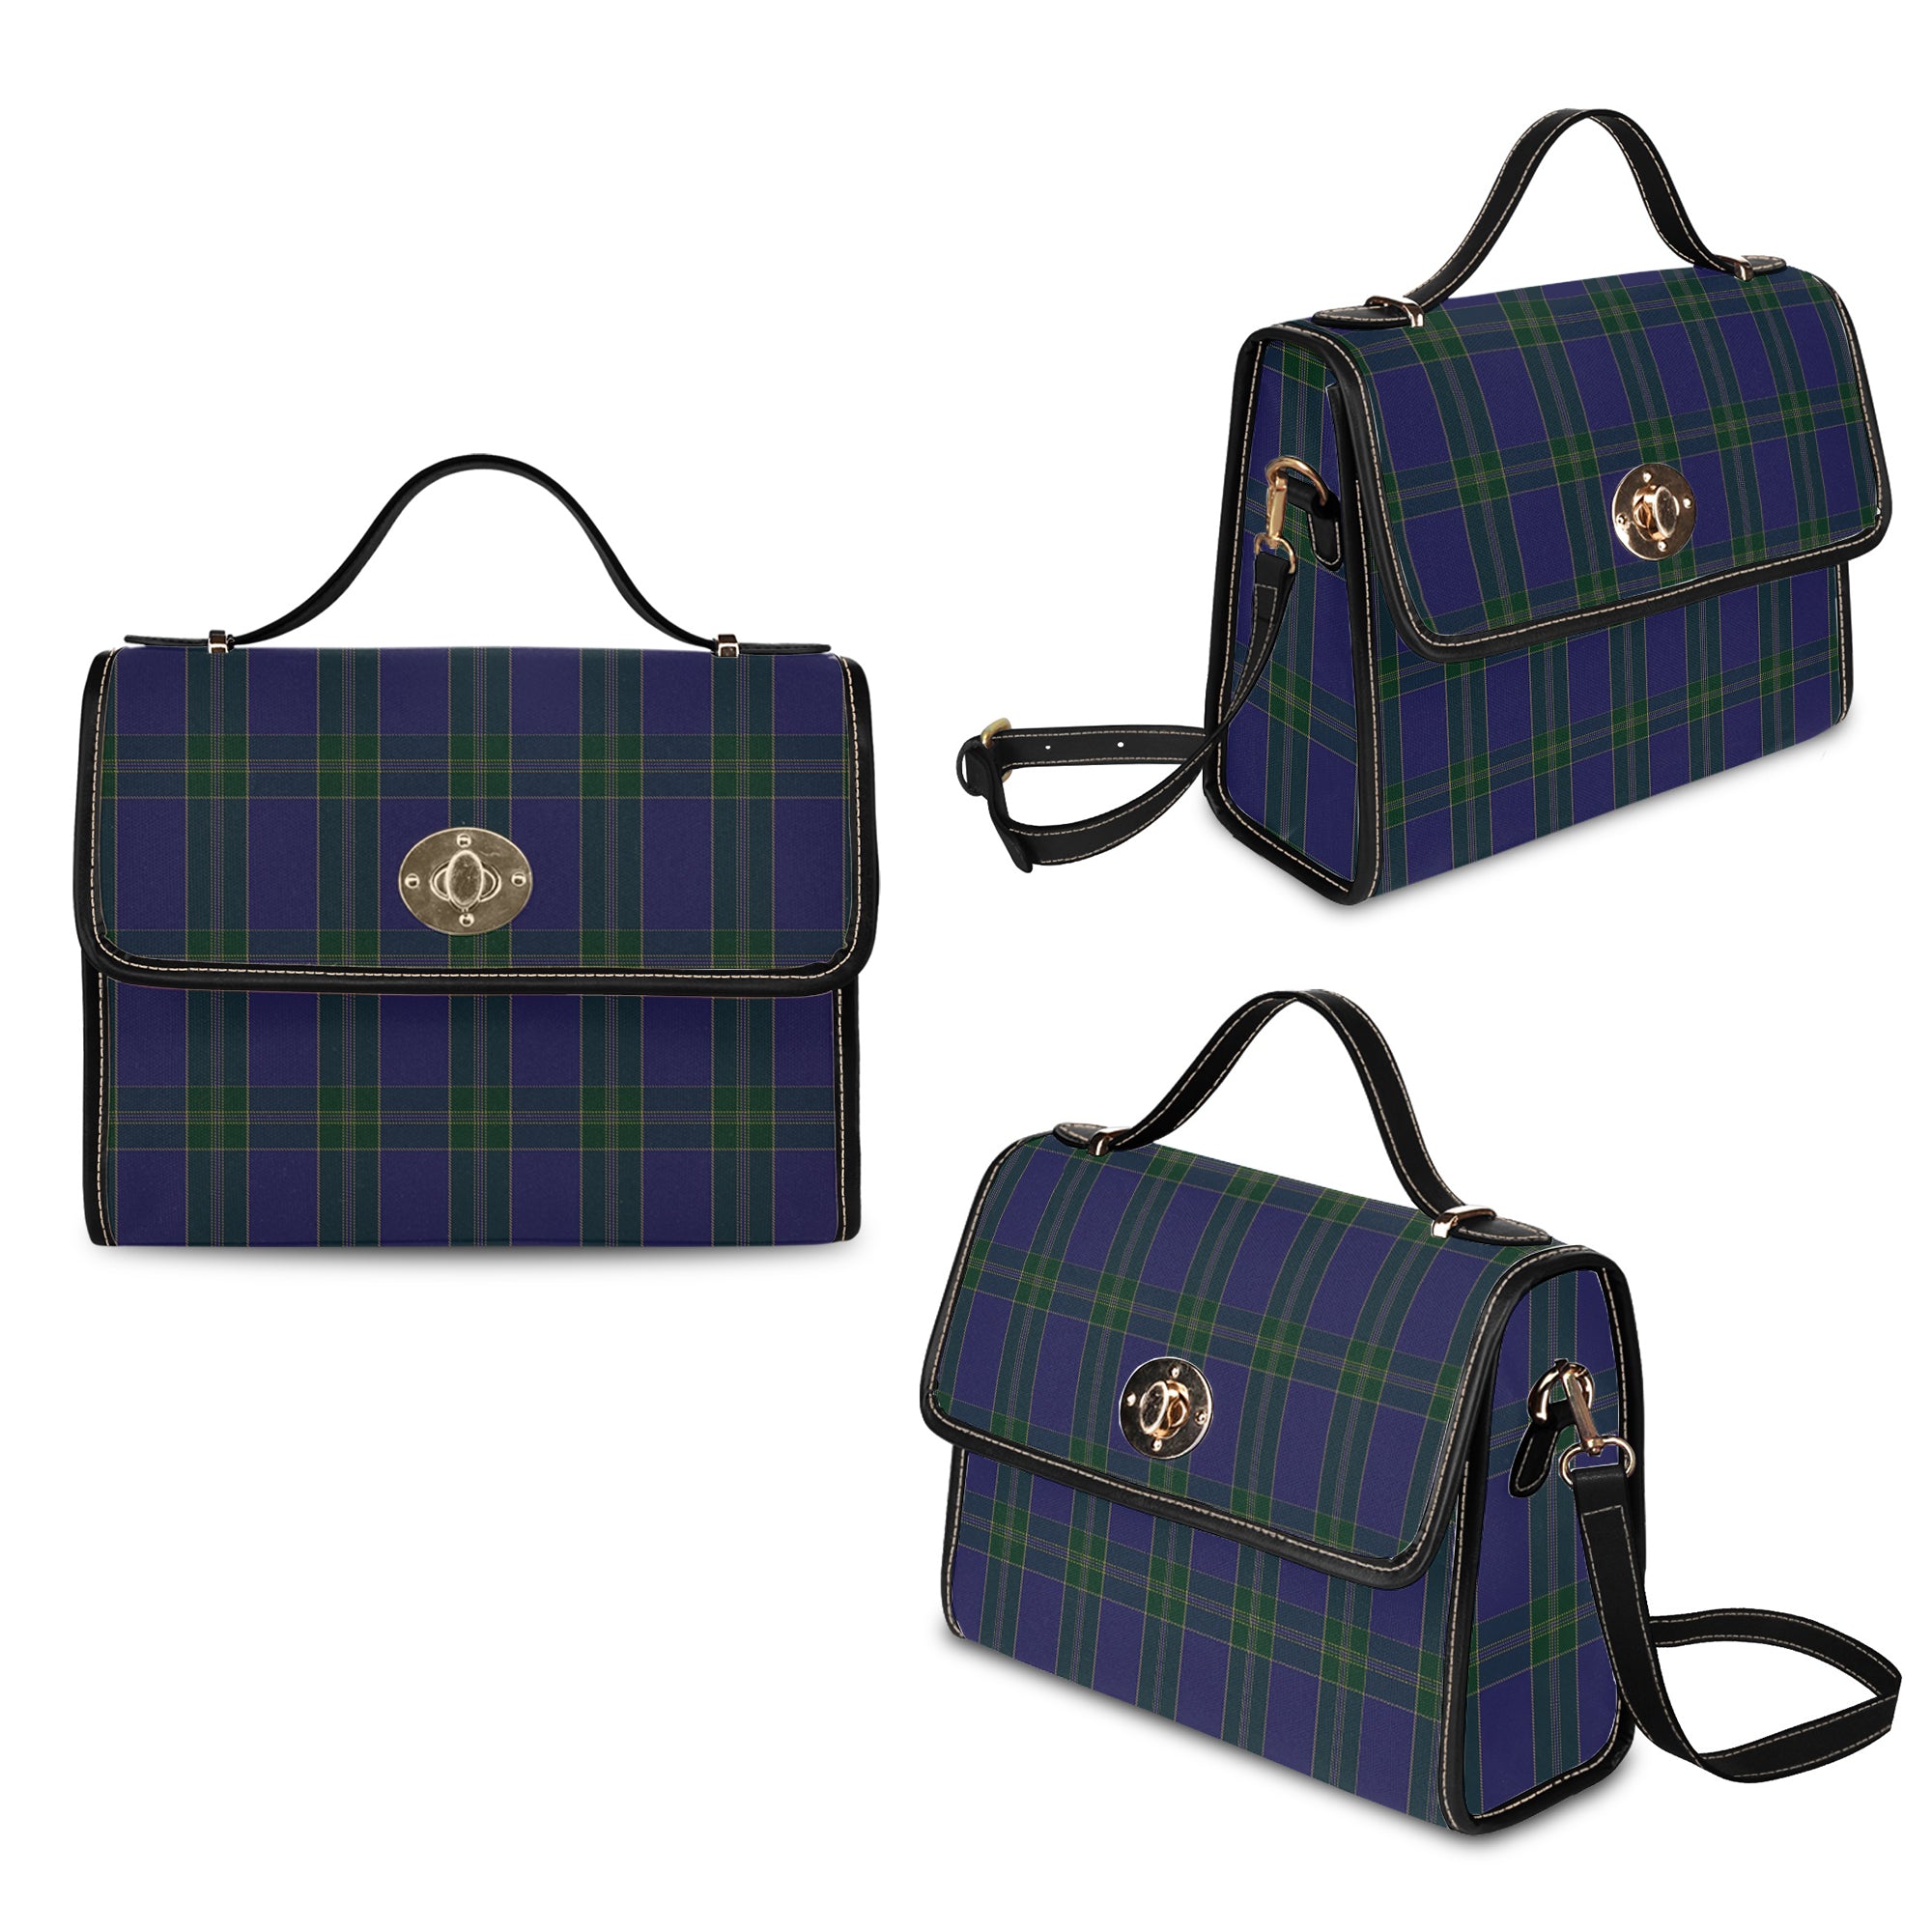 lewis-of-wales-tartan-canvas-bag-with-leather-shoulder-strap